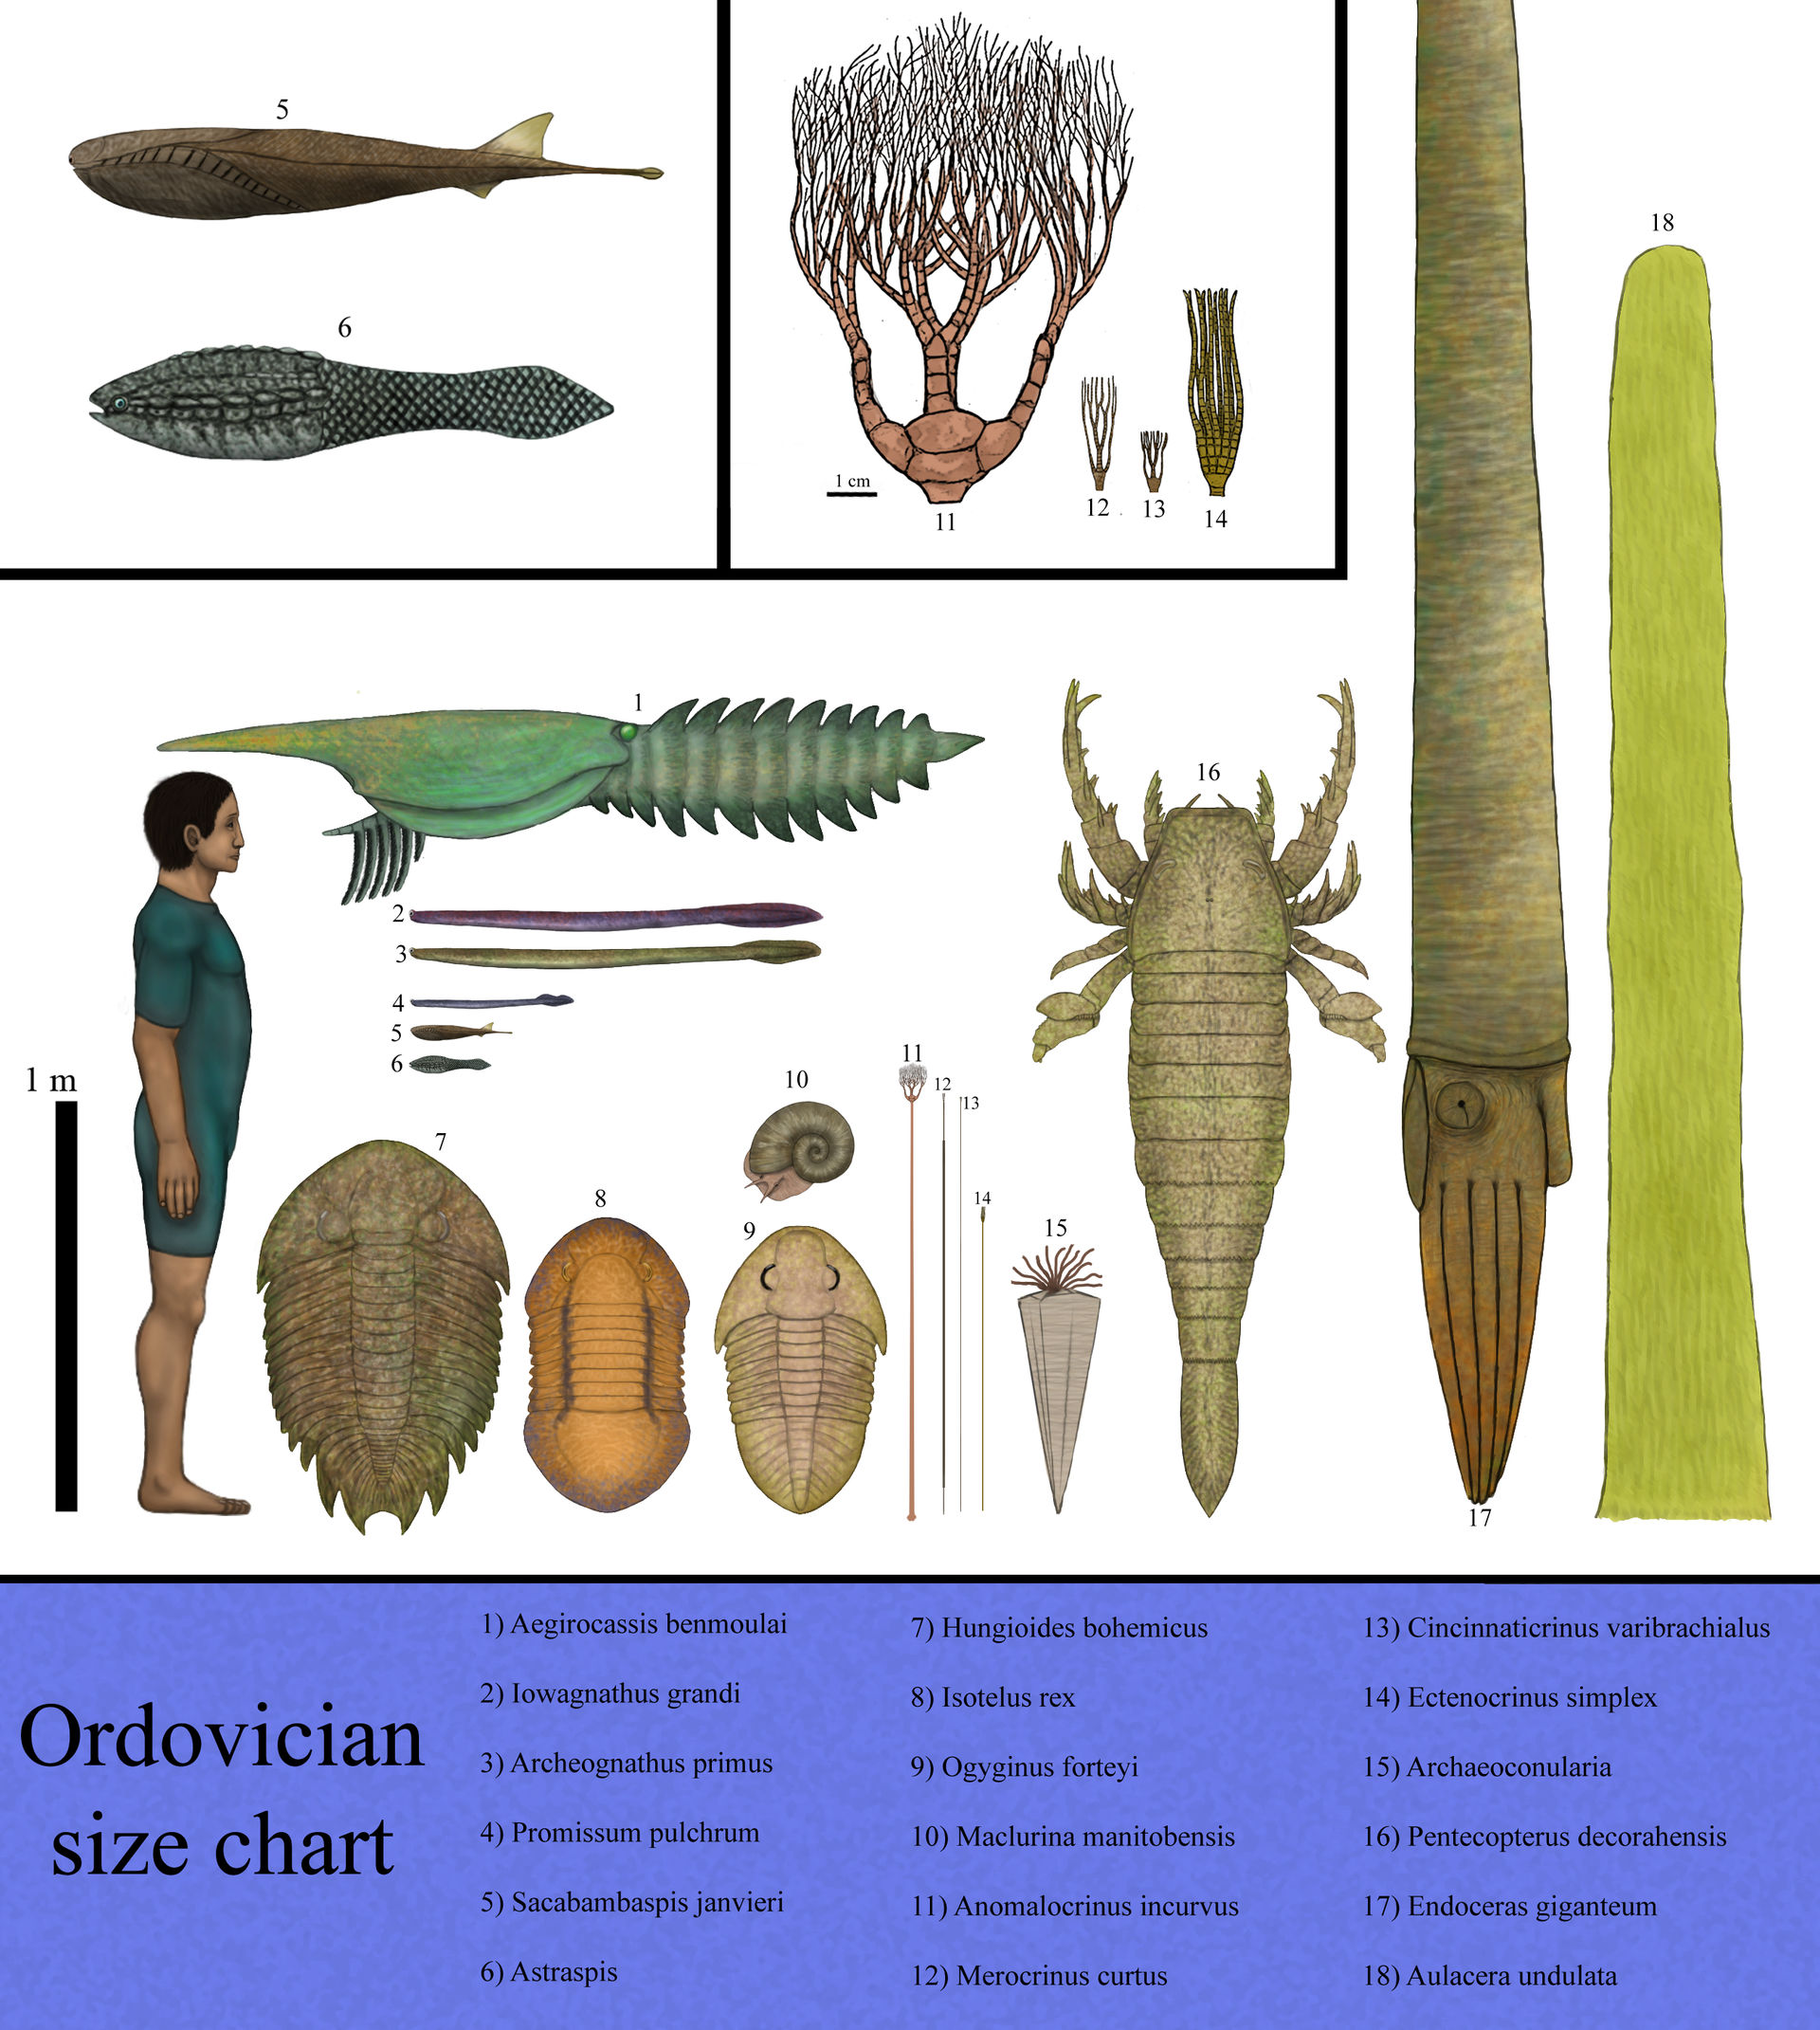 history_size_chart__ordovician_by_dragonthunders_ddybann-fullview.jpg